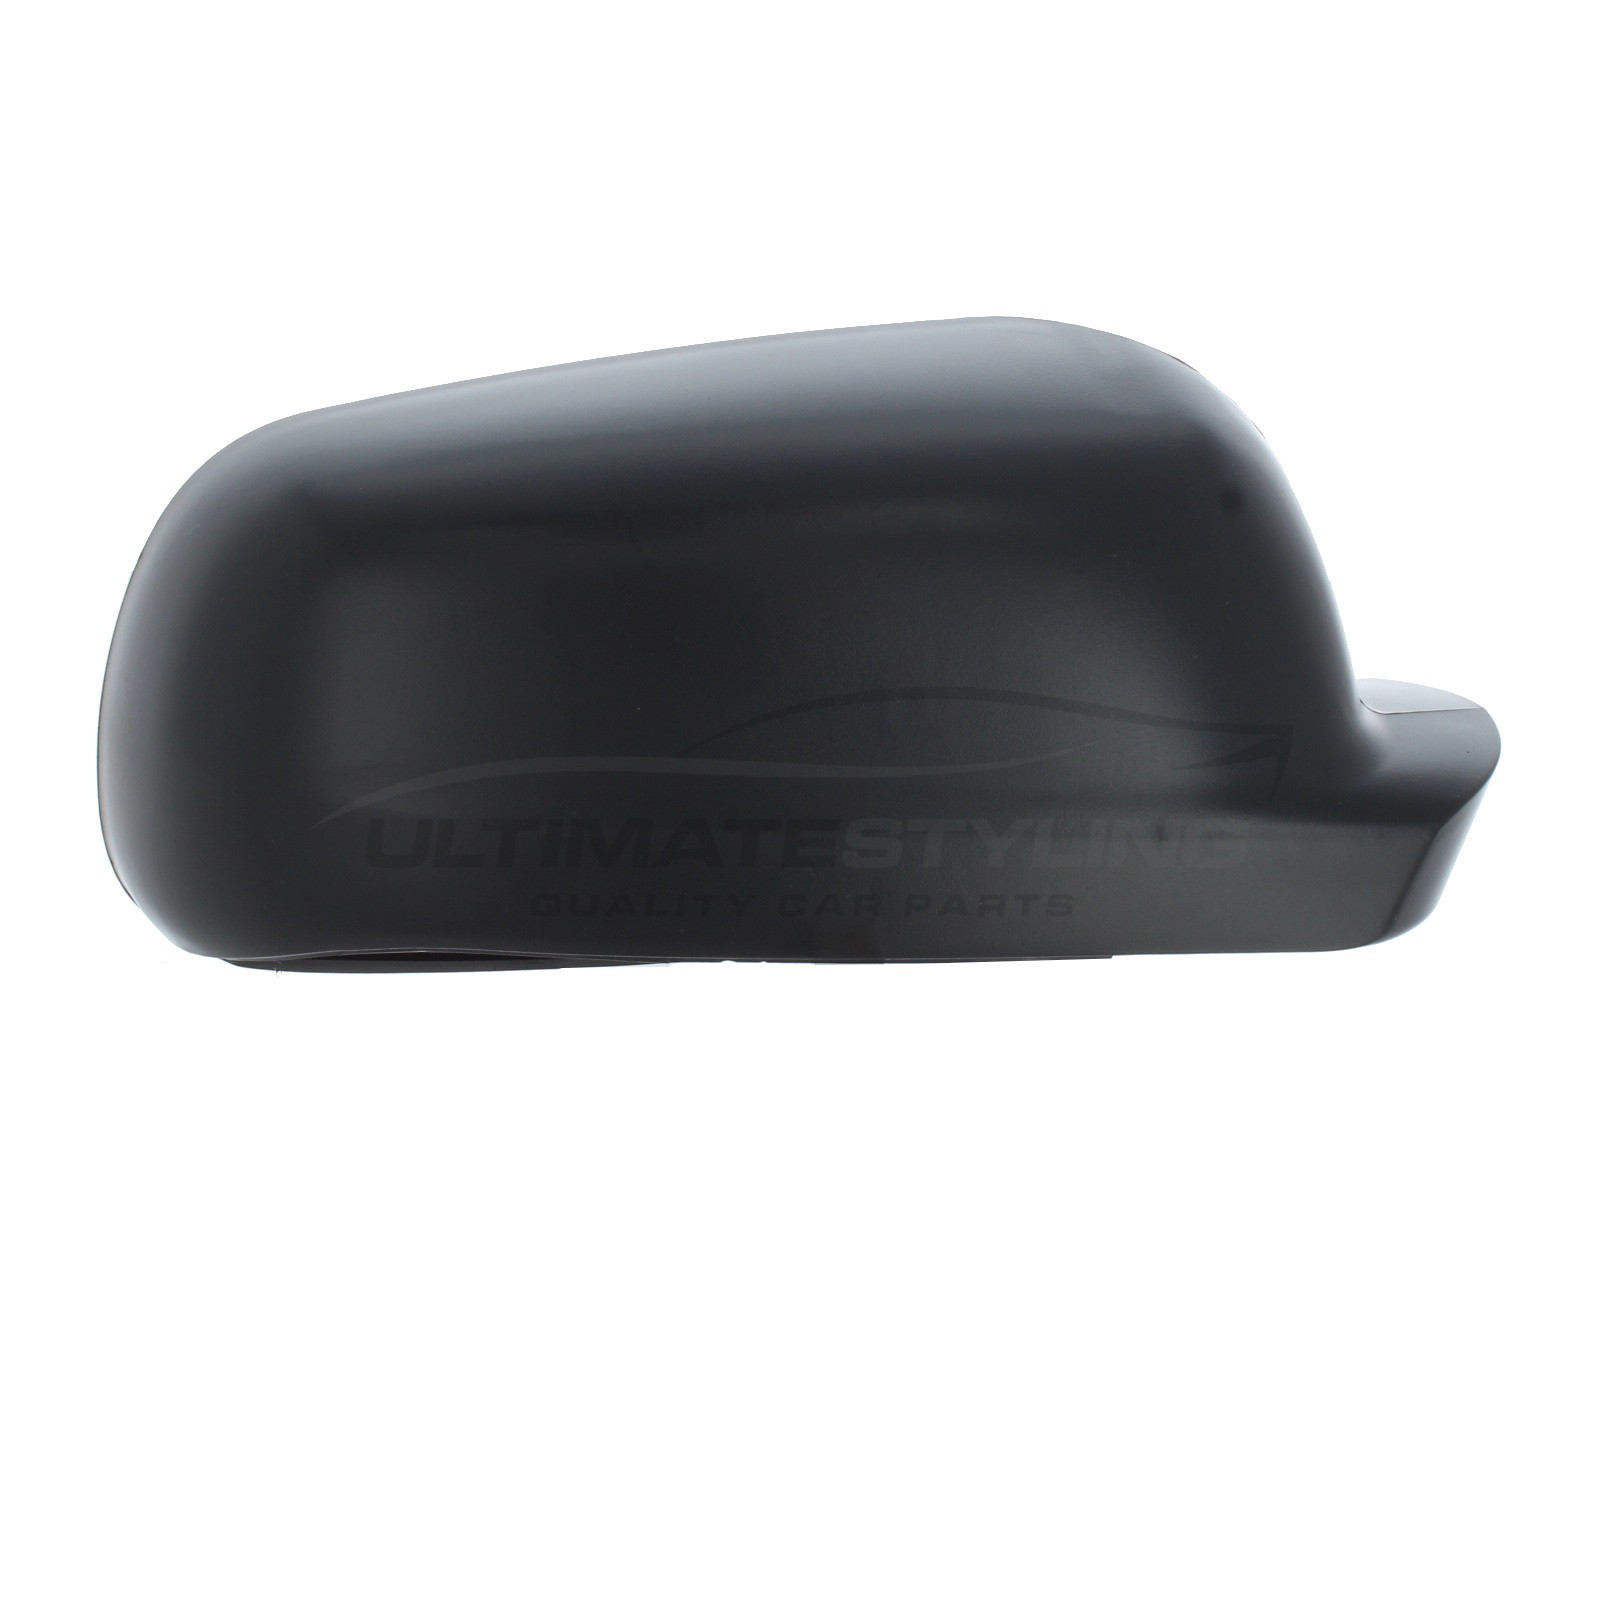 Seat Leon 2000-2005, Seat Toledo 1999-2005 Wing Mirror Cover Cap Casing Black (Textured) Drivers Side (RH)